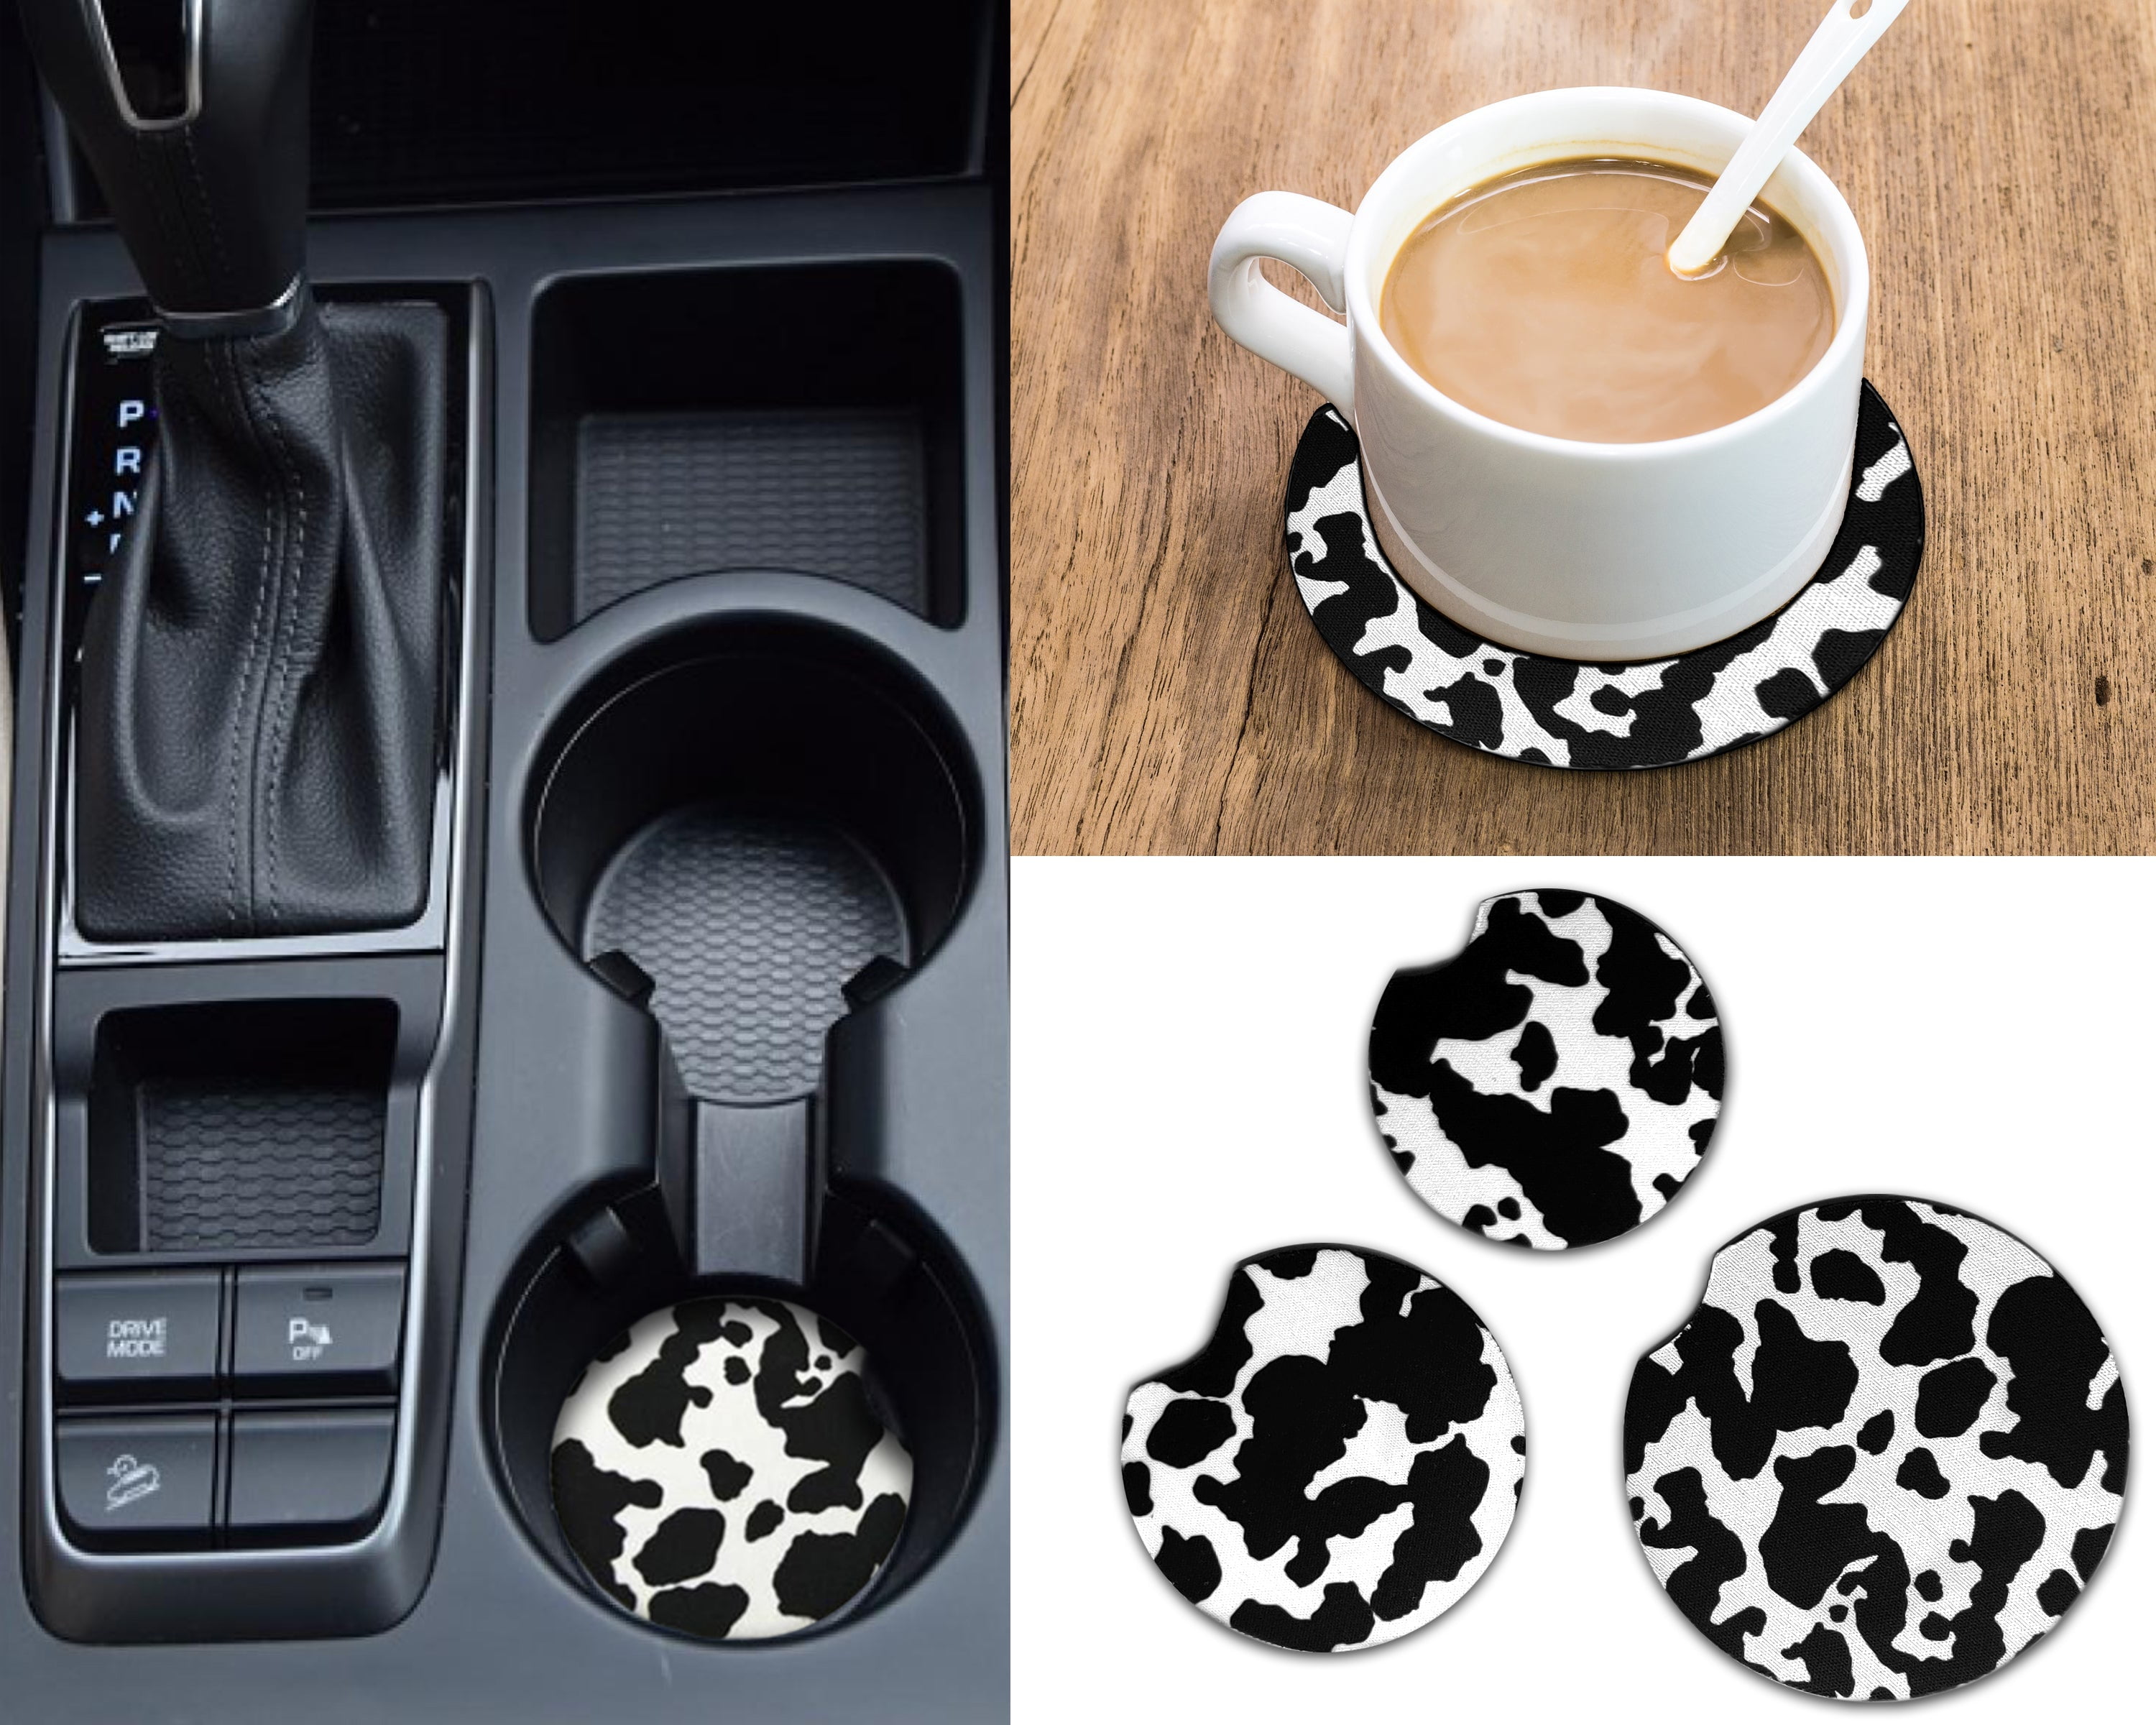 Cow Print Extra Large 3.5 Inch Car Coasters 4 Pack, Absorbent Neoprene  Fabric Coasters Car Cup Coaster Drink Cup Holder Coasters, Animal Themed,  Black and White (COW PRINT, LARGE) 